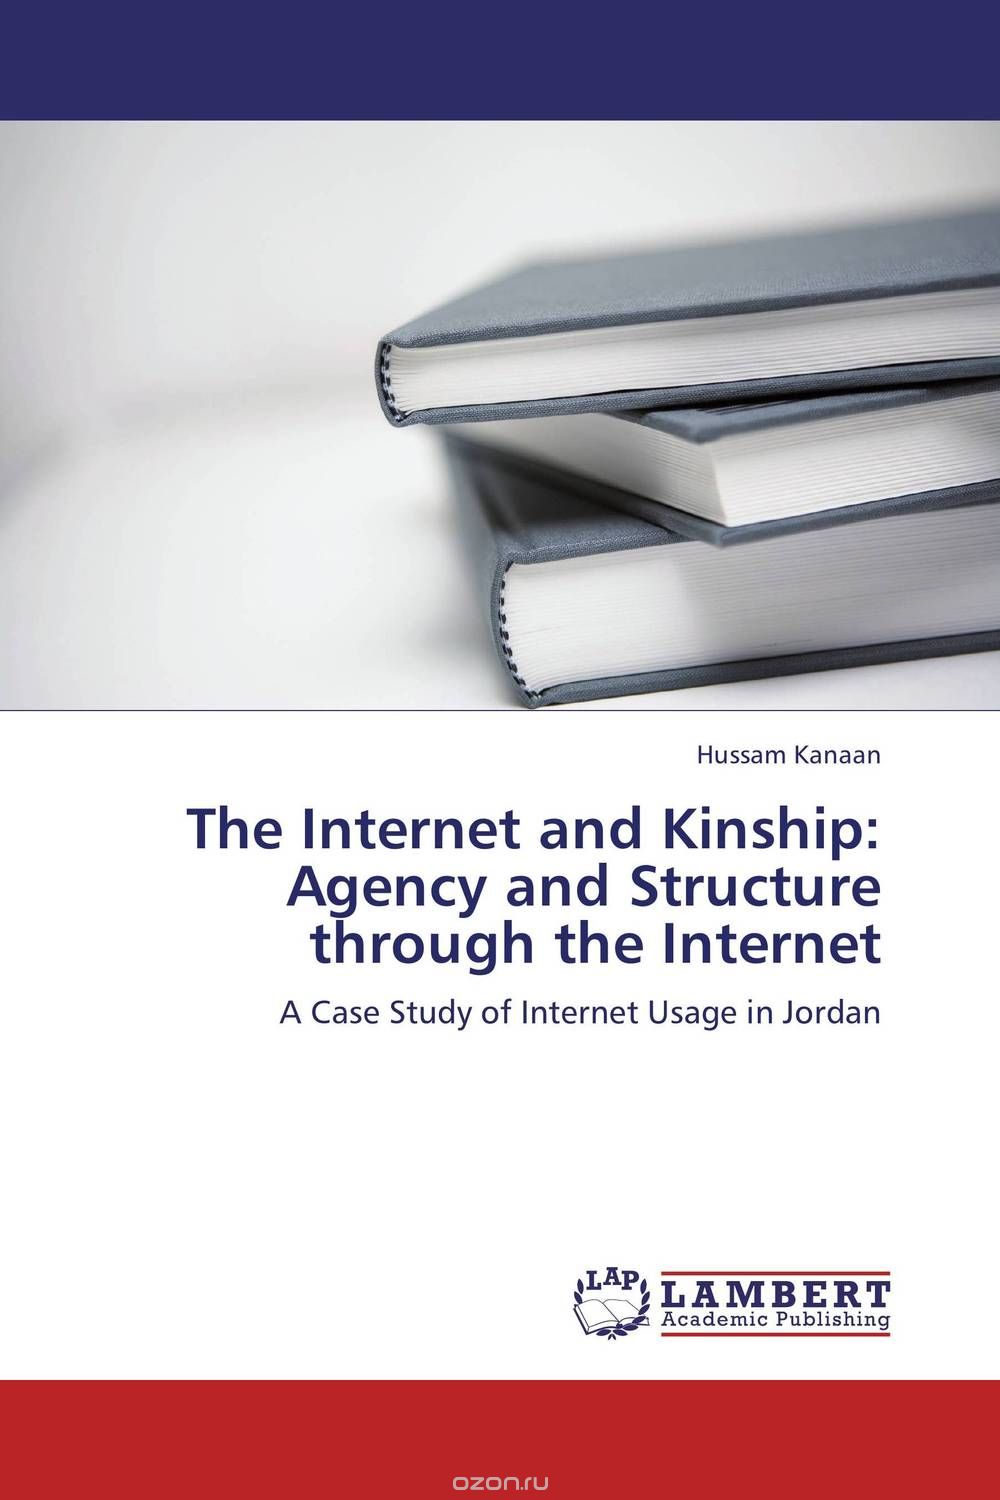 Скачать книгу "The Internet and Kinship: Agency and Structure through the Internet"